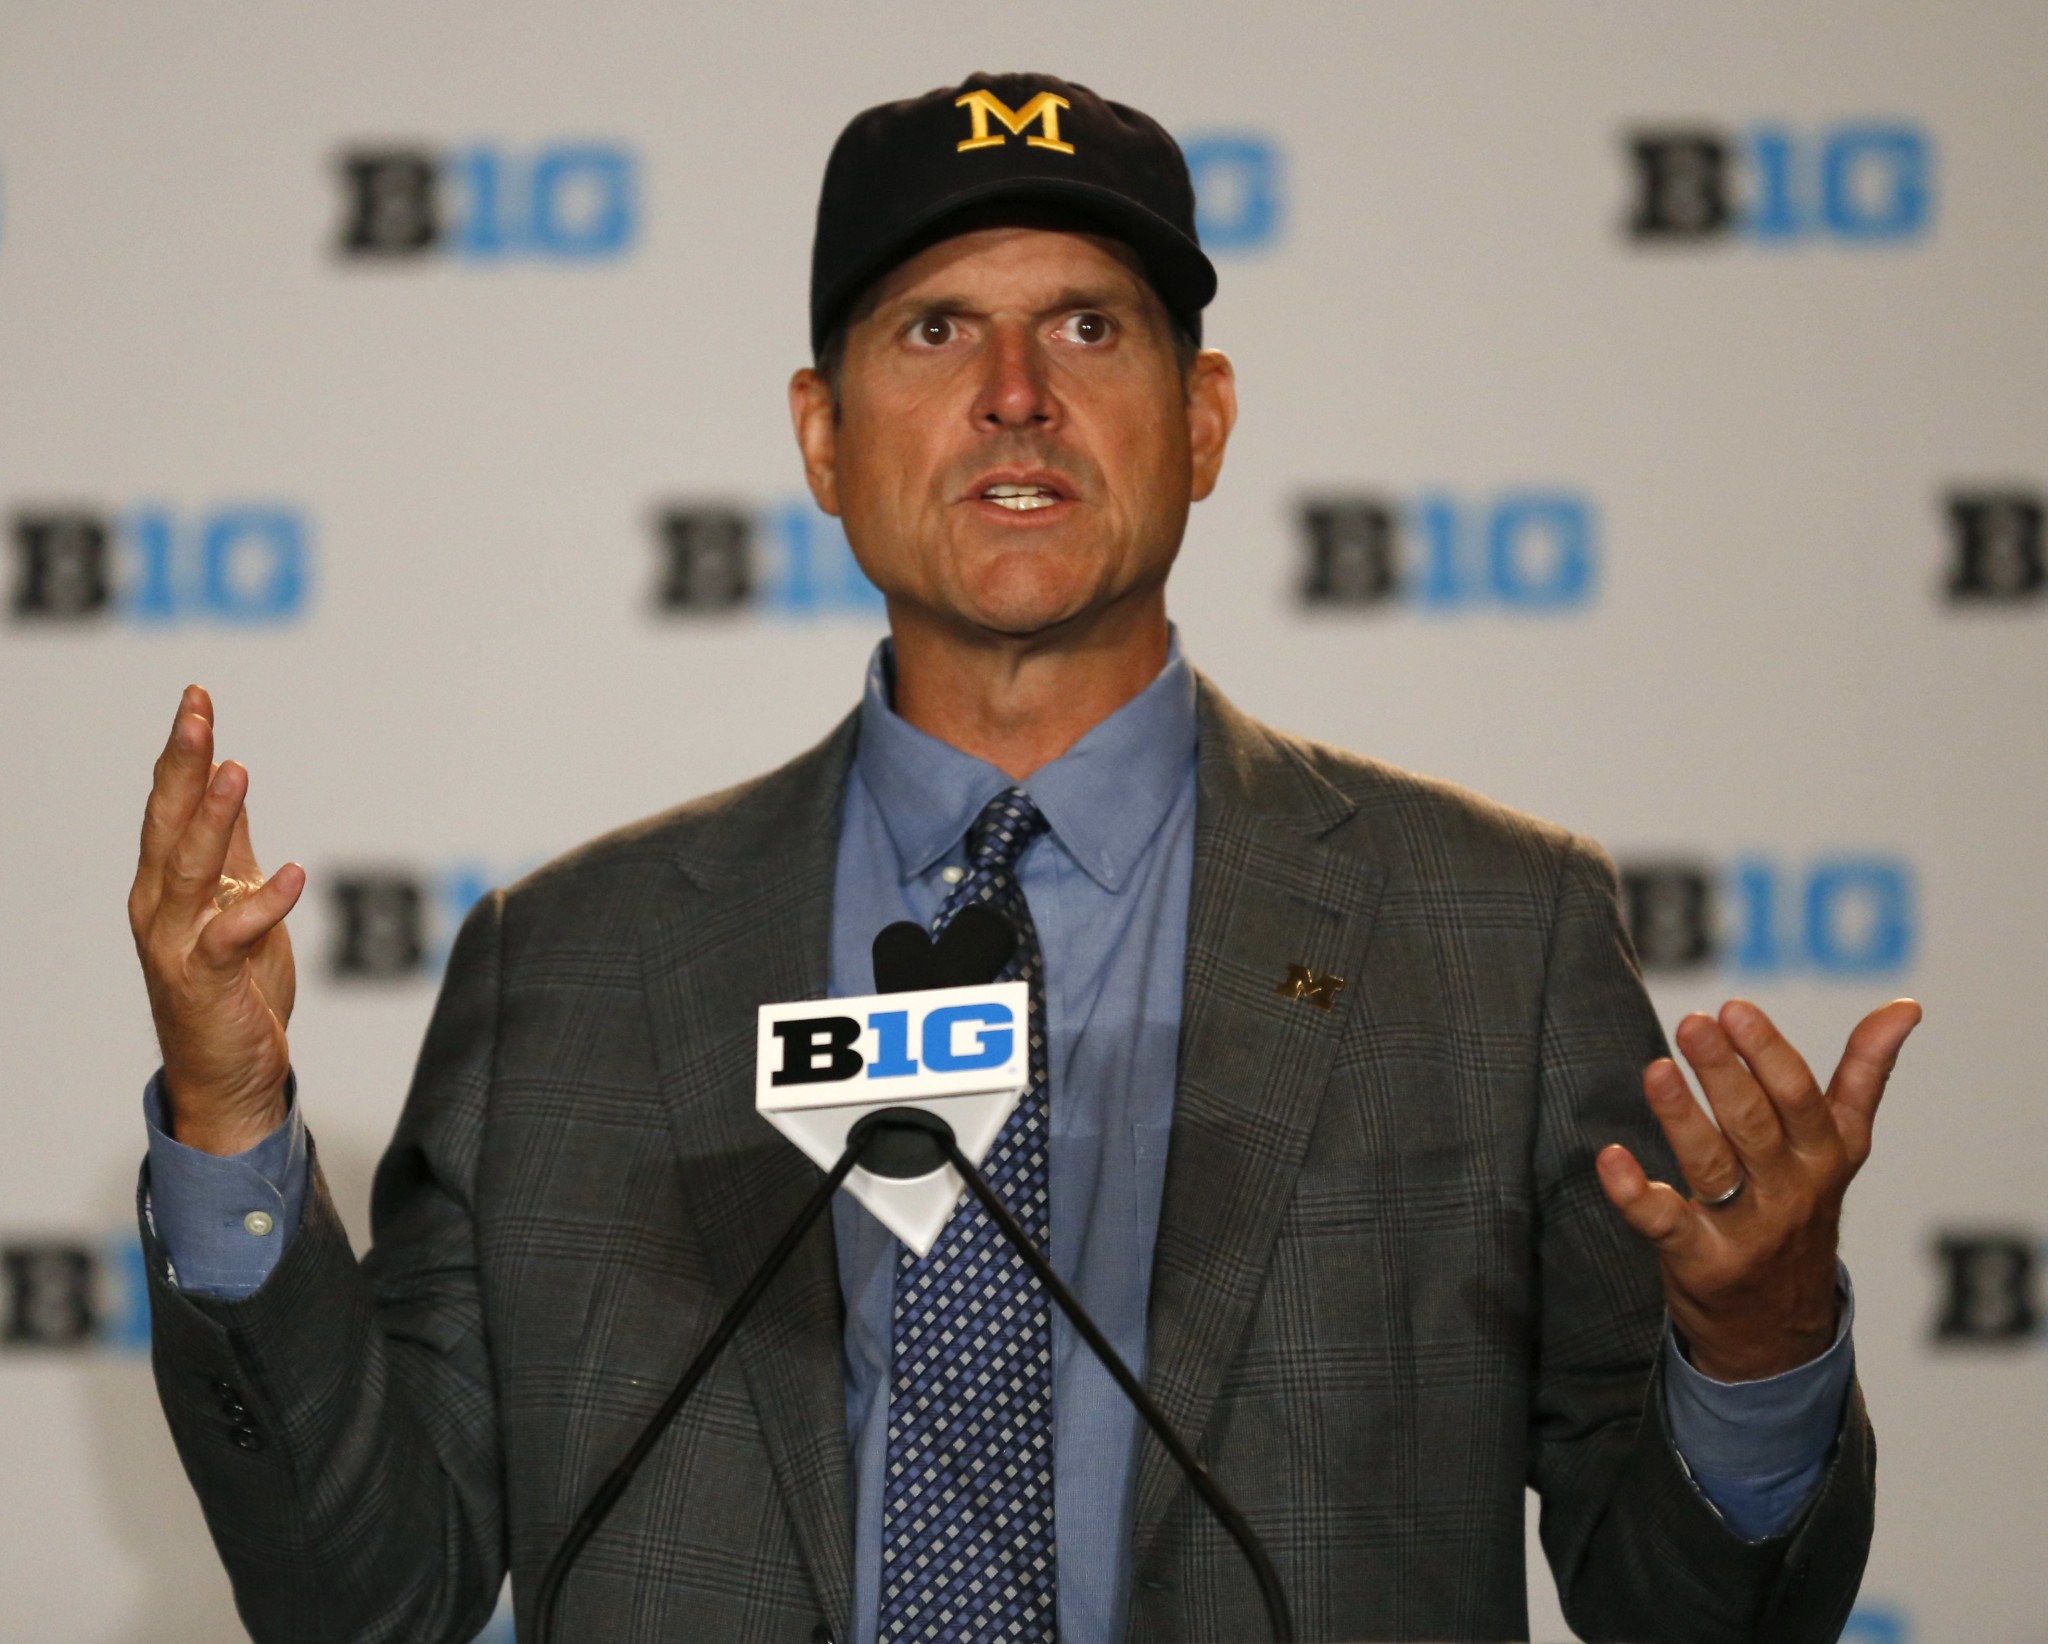 Michigan head coach Jim Harbaugh speaks to the media at the Big Ten NCAA college football media days, Monday, July 25, 2016 in Chicago. (AP Photo/Tae-Gyun Kim)